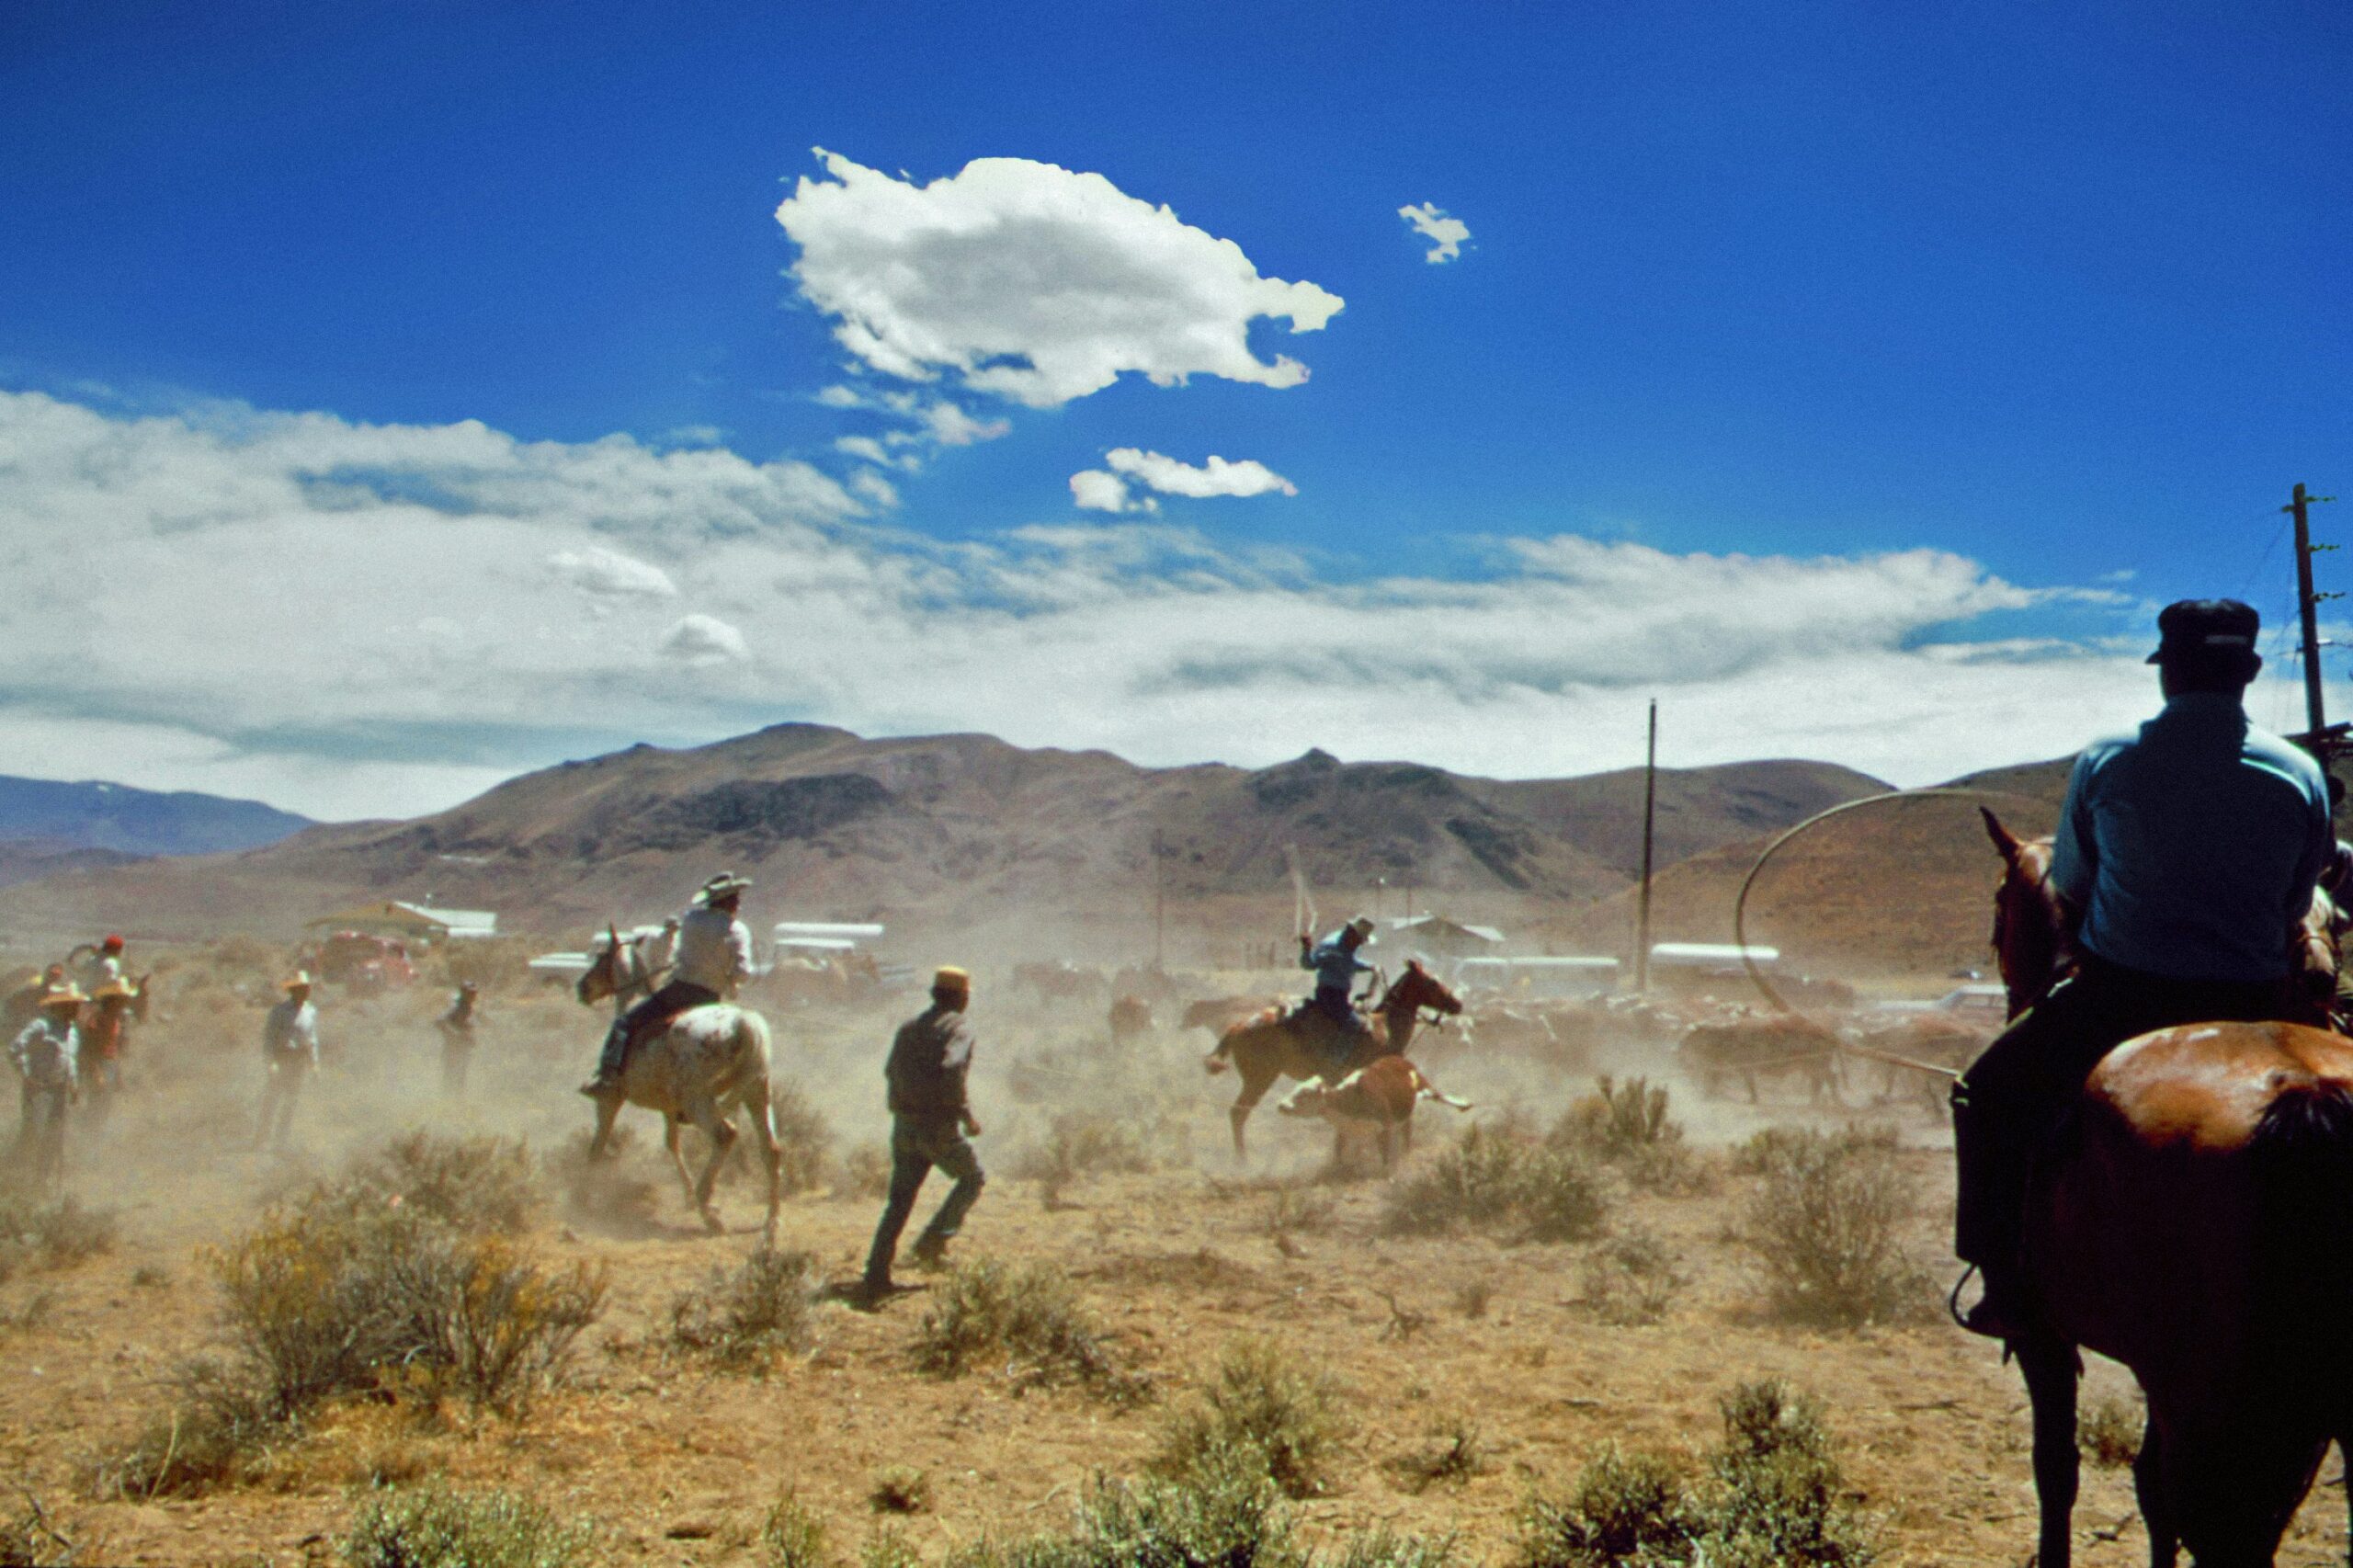 This lakeside location is a filming spot of a western movie featuring Clint Eastwood.
Pictured: cowboys seemingly charging around on horses on a bright blue day